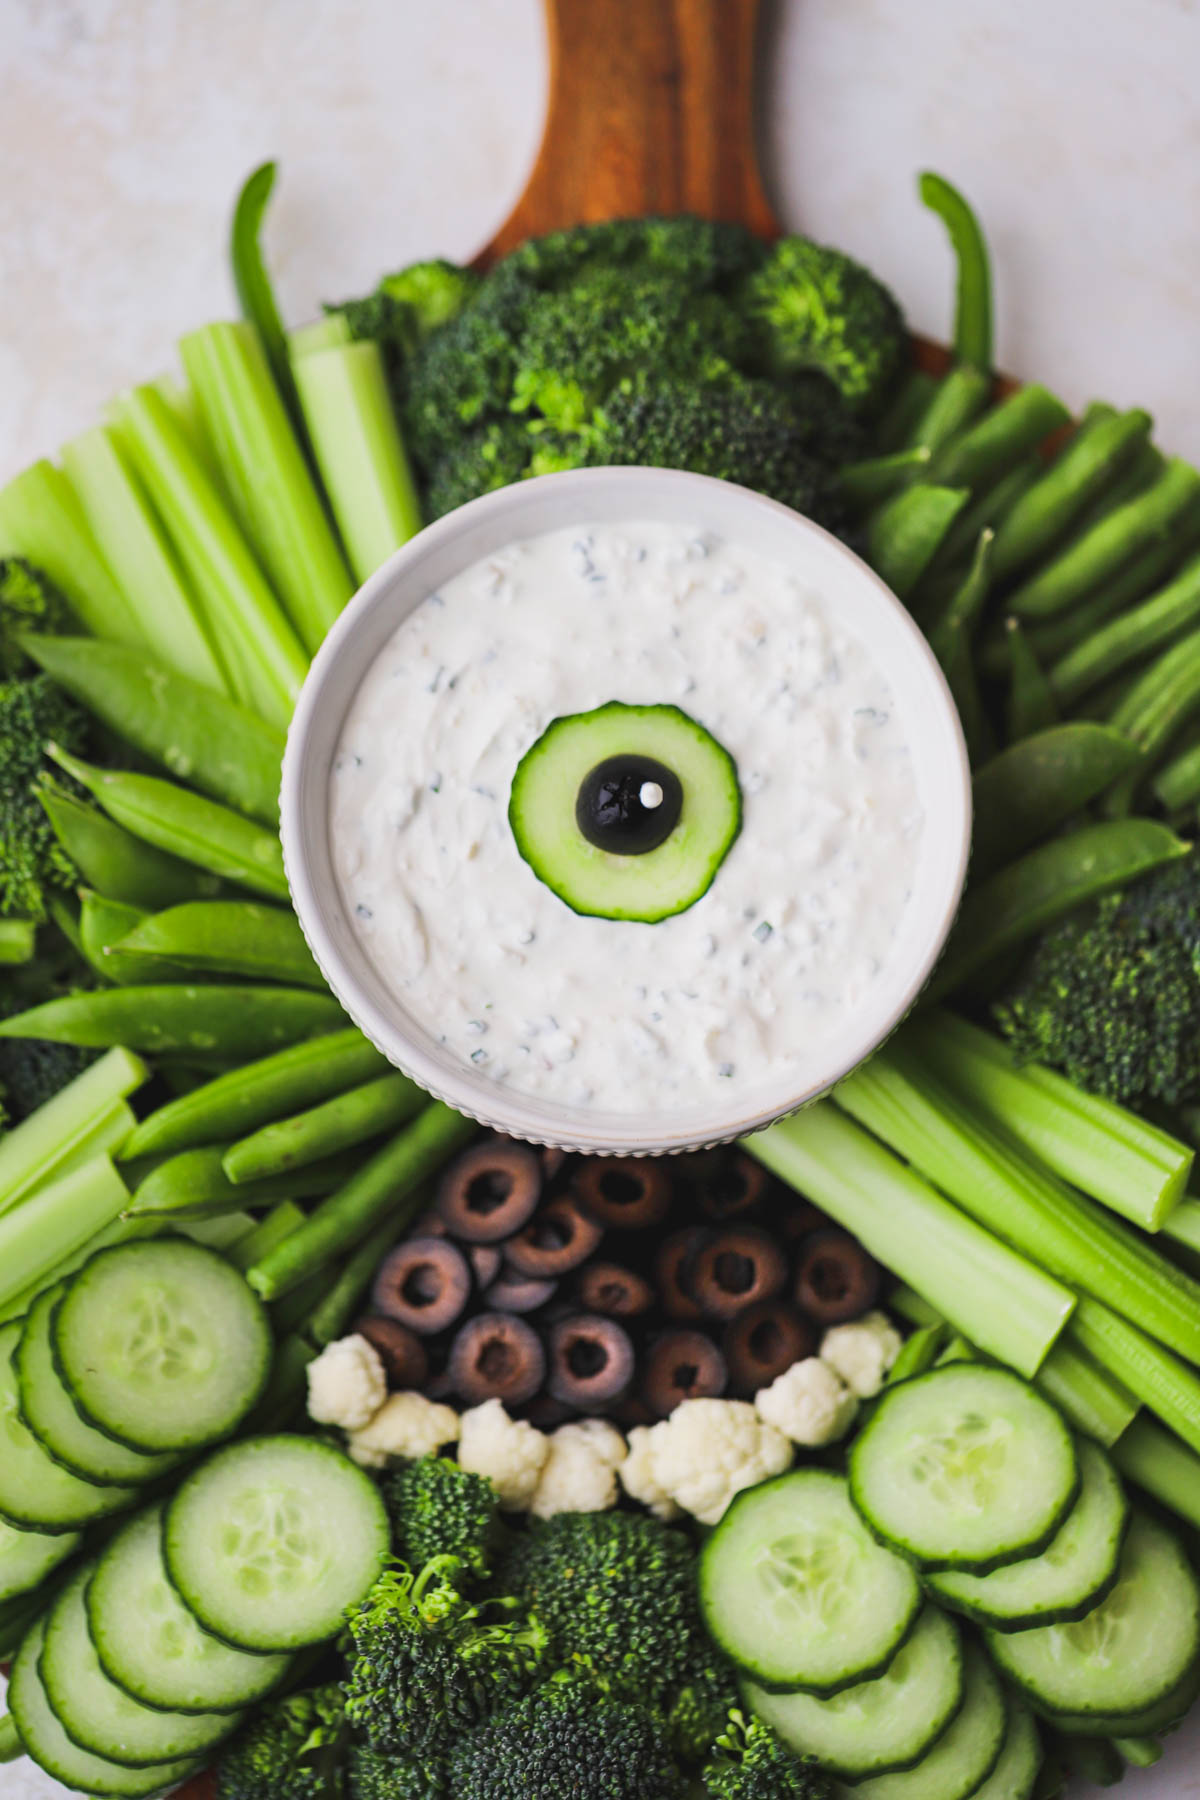 Sour cream and chive dip served alongside cucumbers, broccoli, celery, green beans and a Mike Wazowski inspired mouth.  